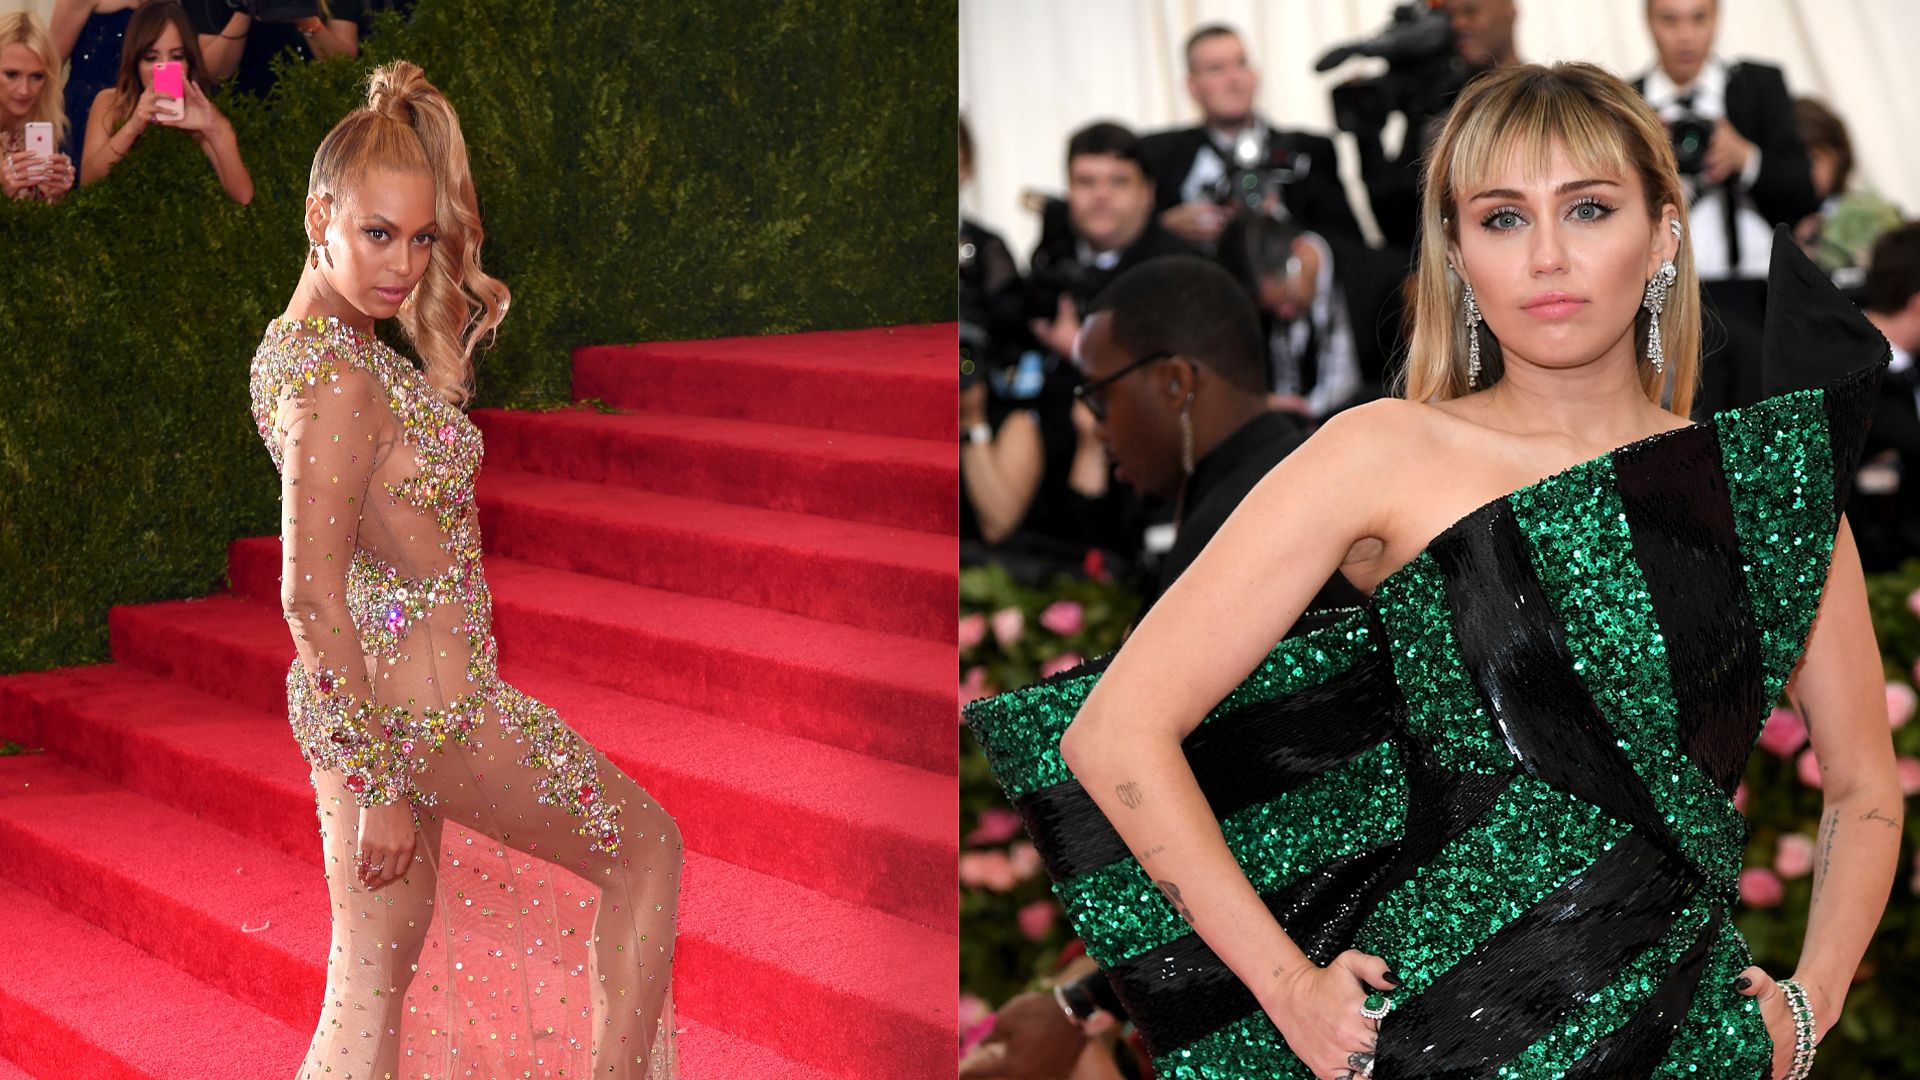 Celeb Couples Who Turned the 2022 Met Gala Into the Ultimate Date